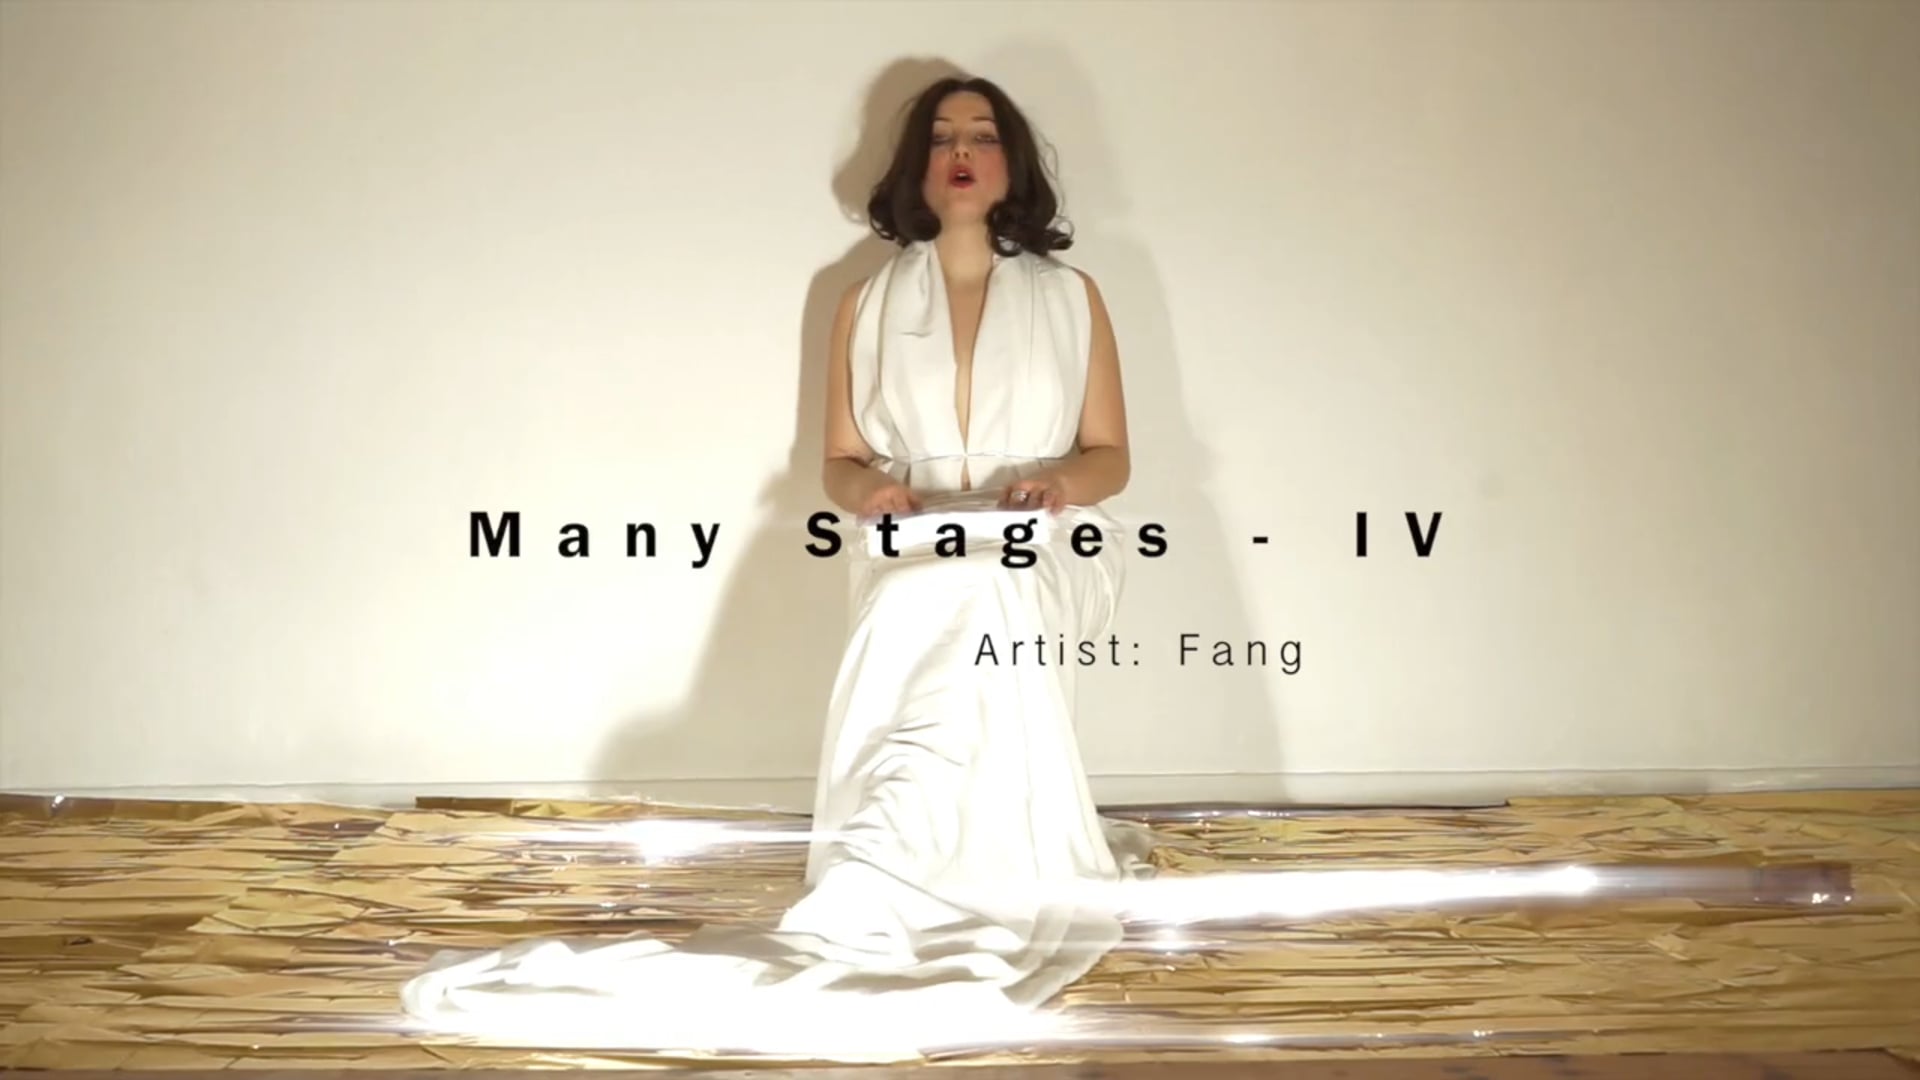 Many stages - IV